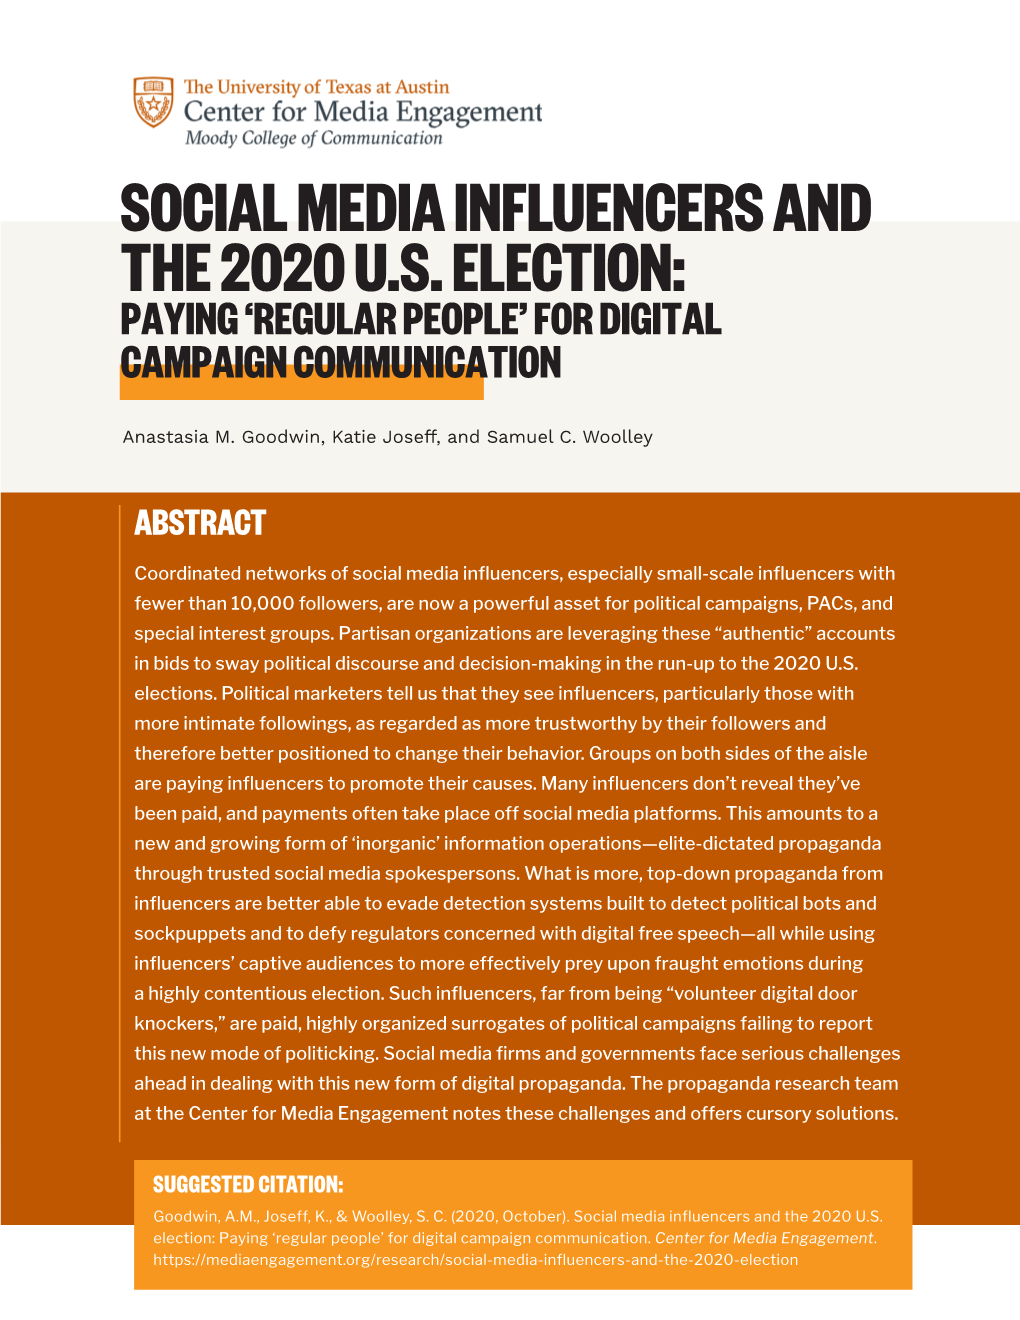 Social Media Influencers and the 2020 U.S. Election: Paying ‘Regular People’ for Digital Campaign Communication